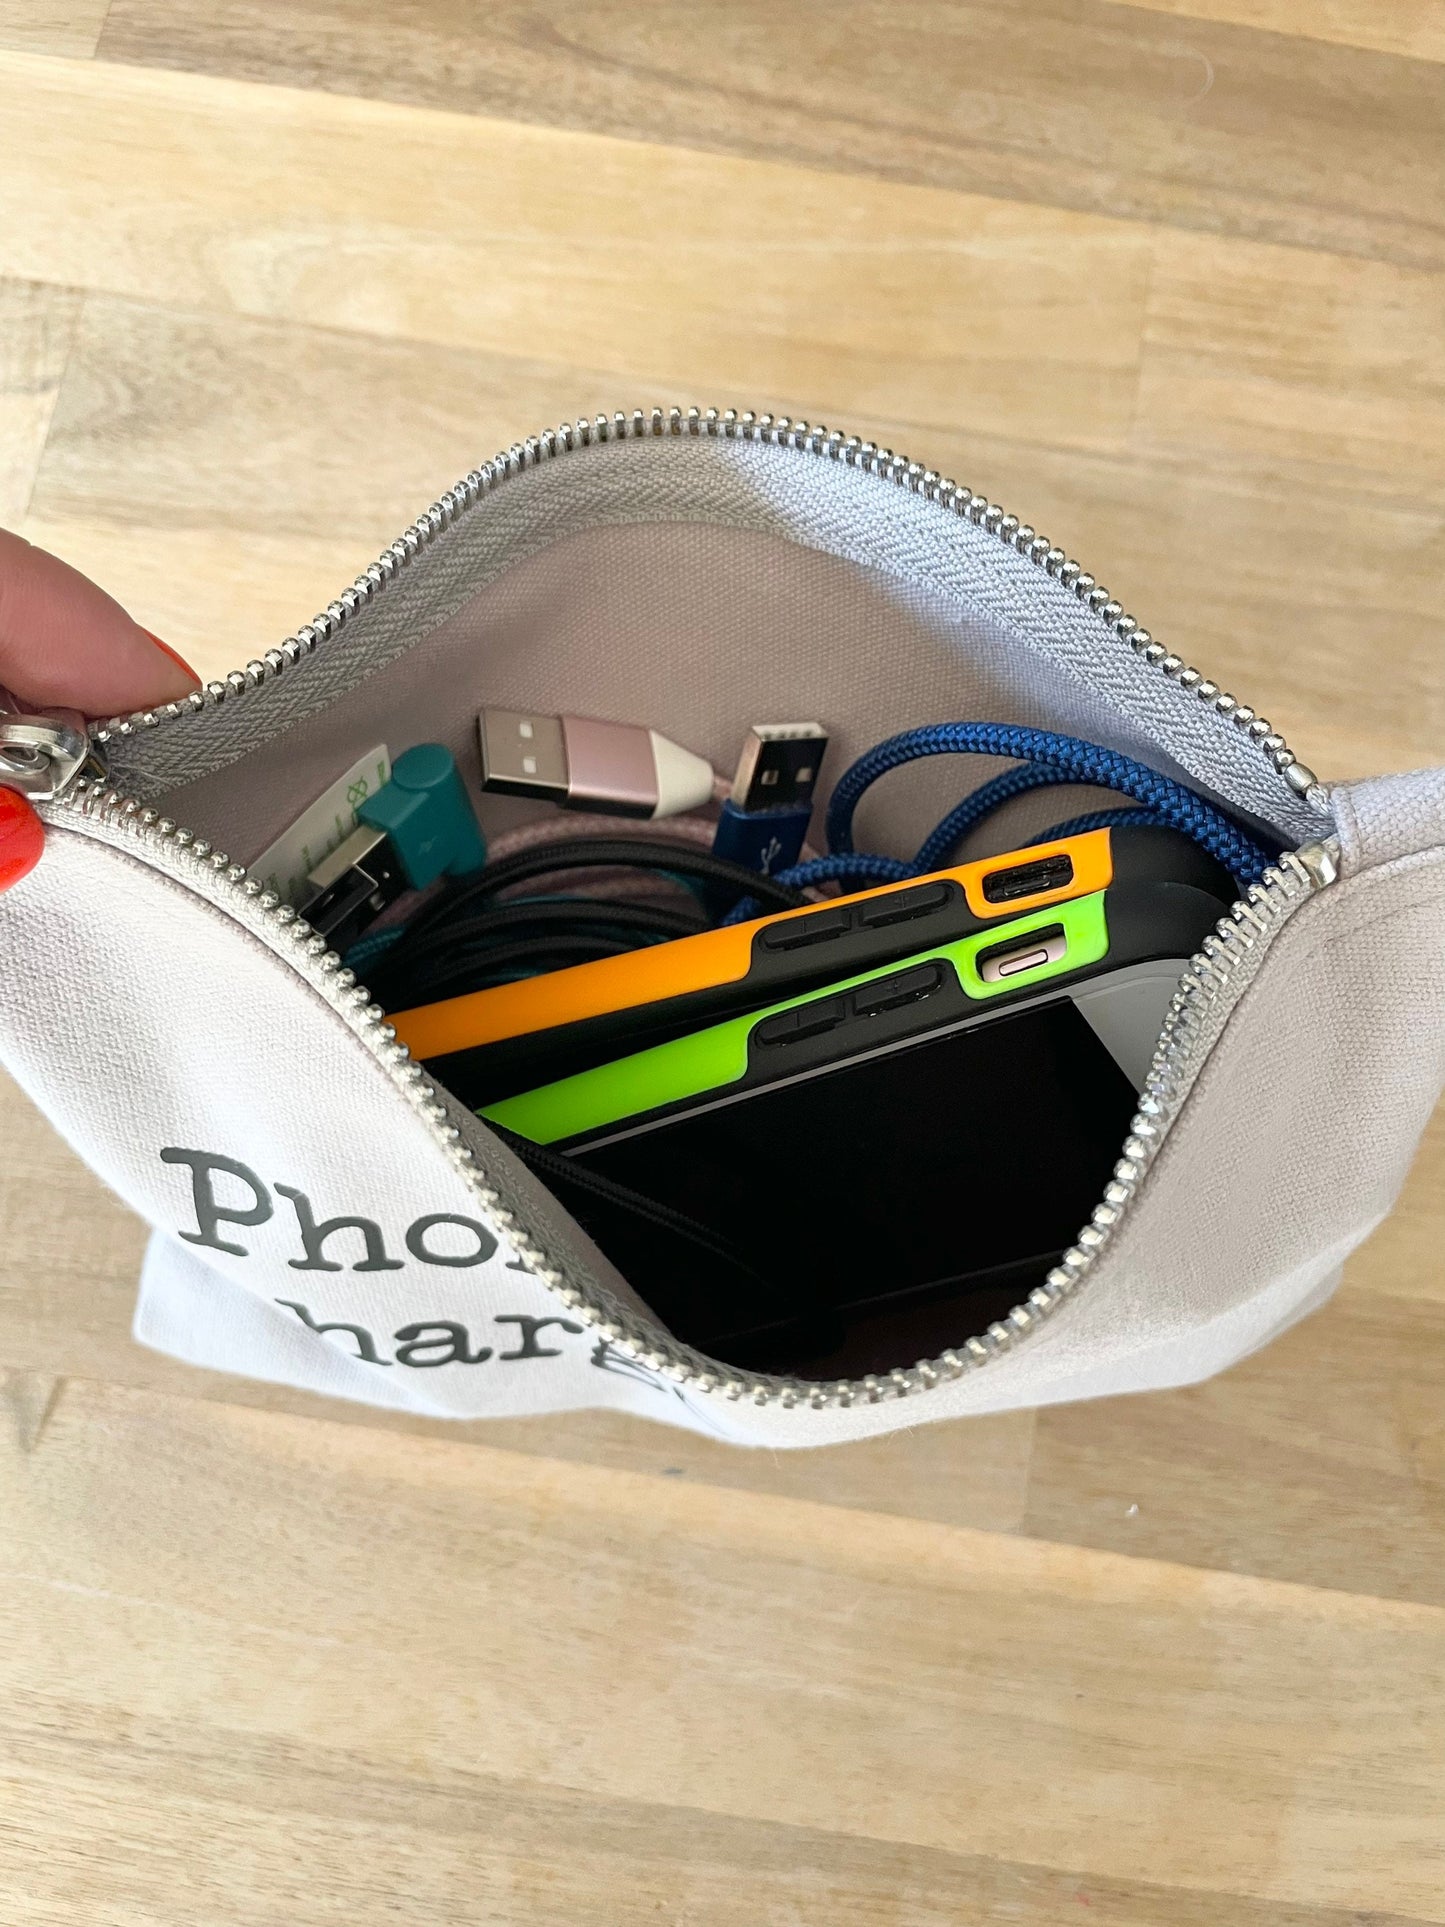 Personalised Techy Stuff case, Chargers and cables bag, Father’s Day gift idea for dad, husband and grandads. Men gift ideas for birthdays